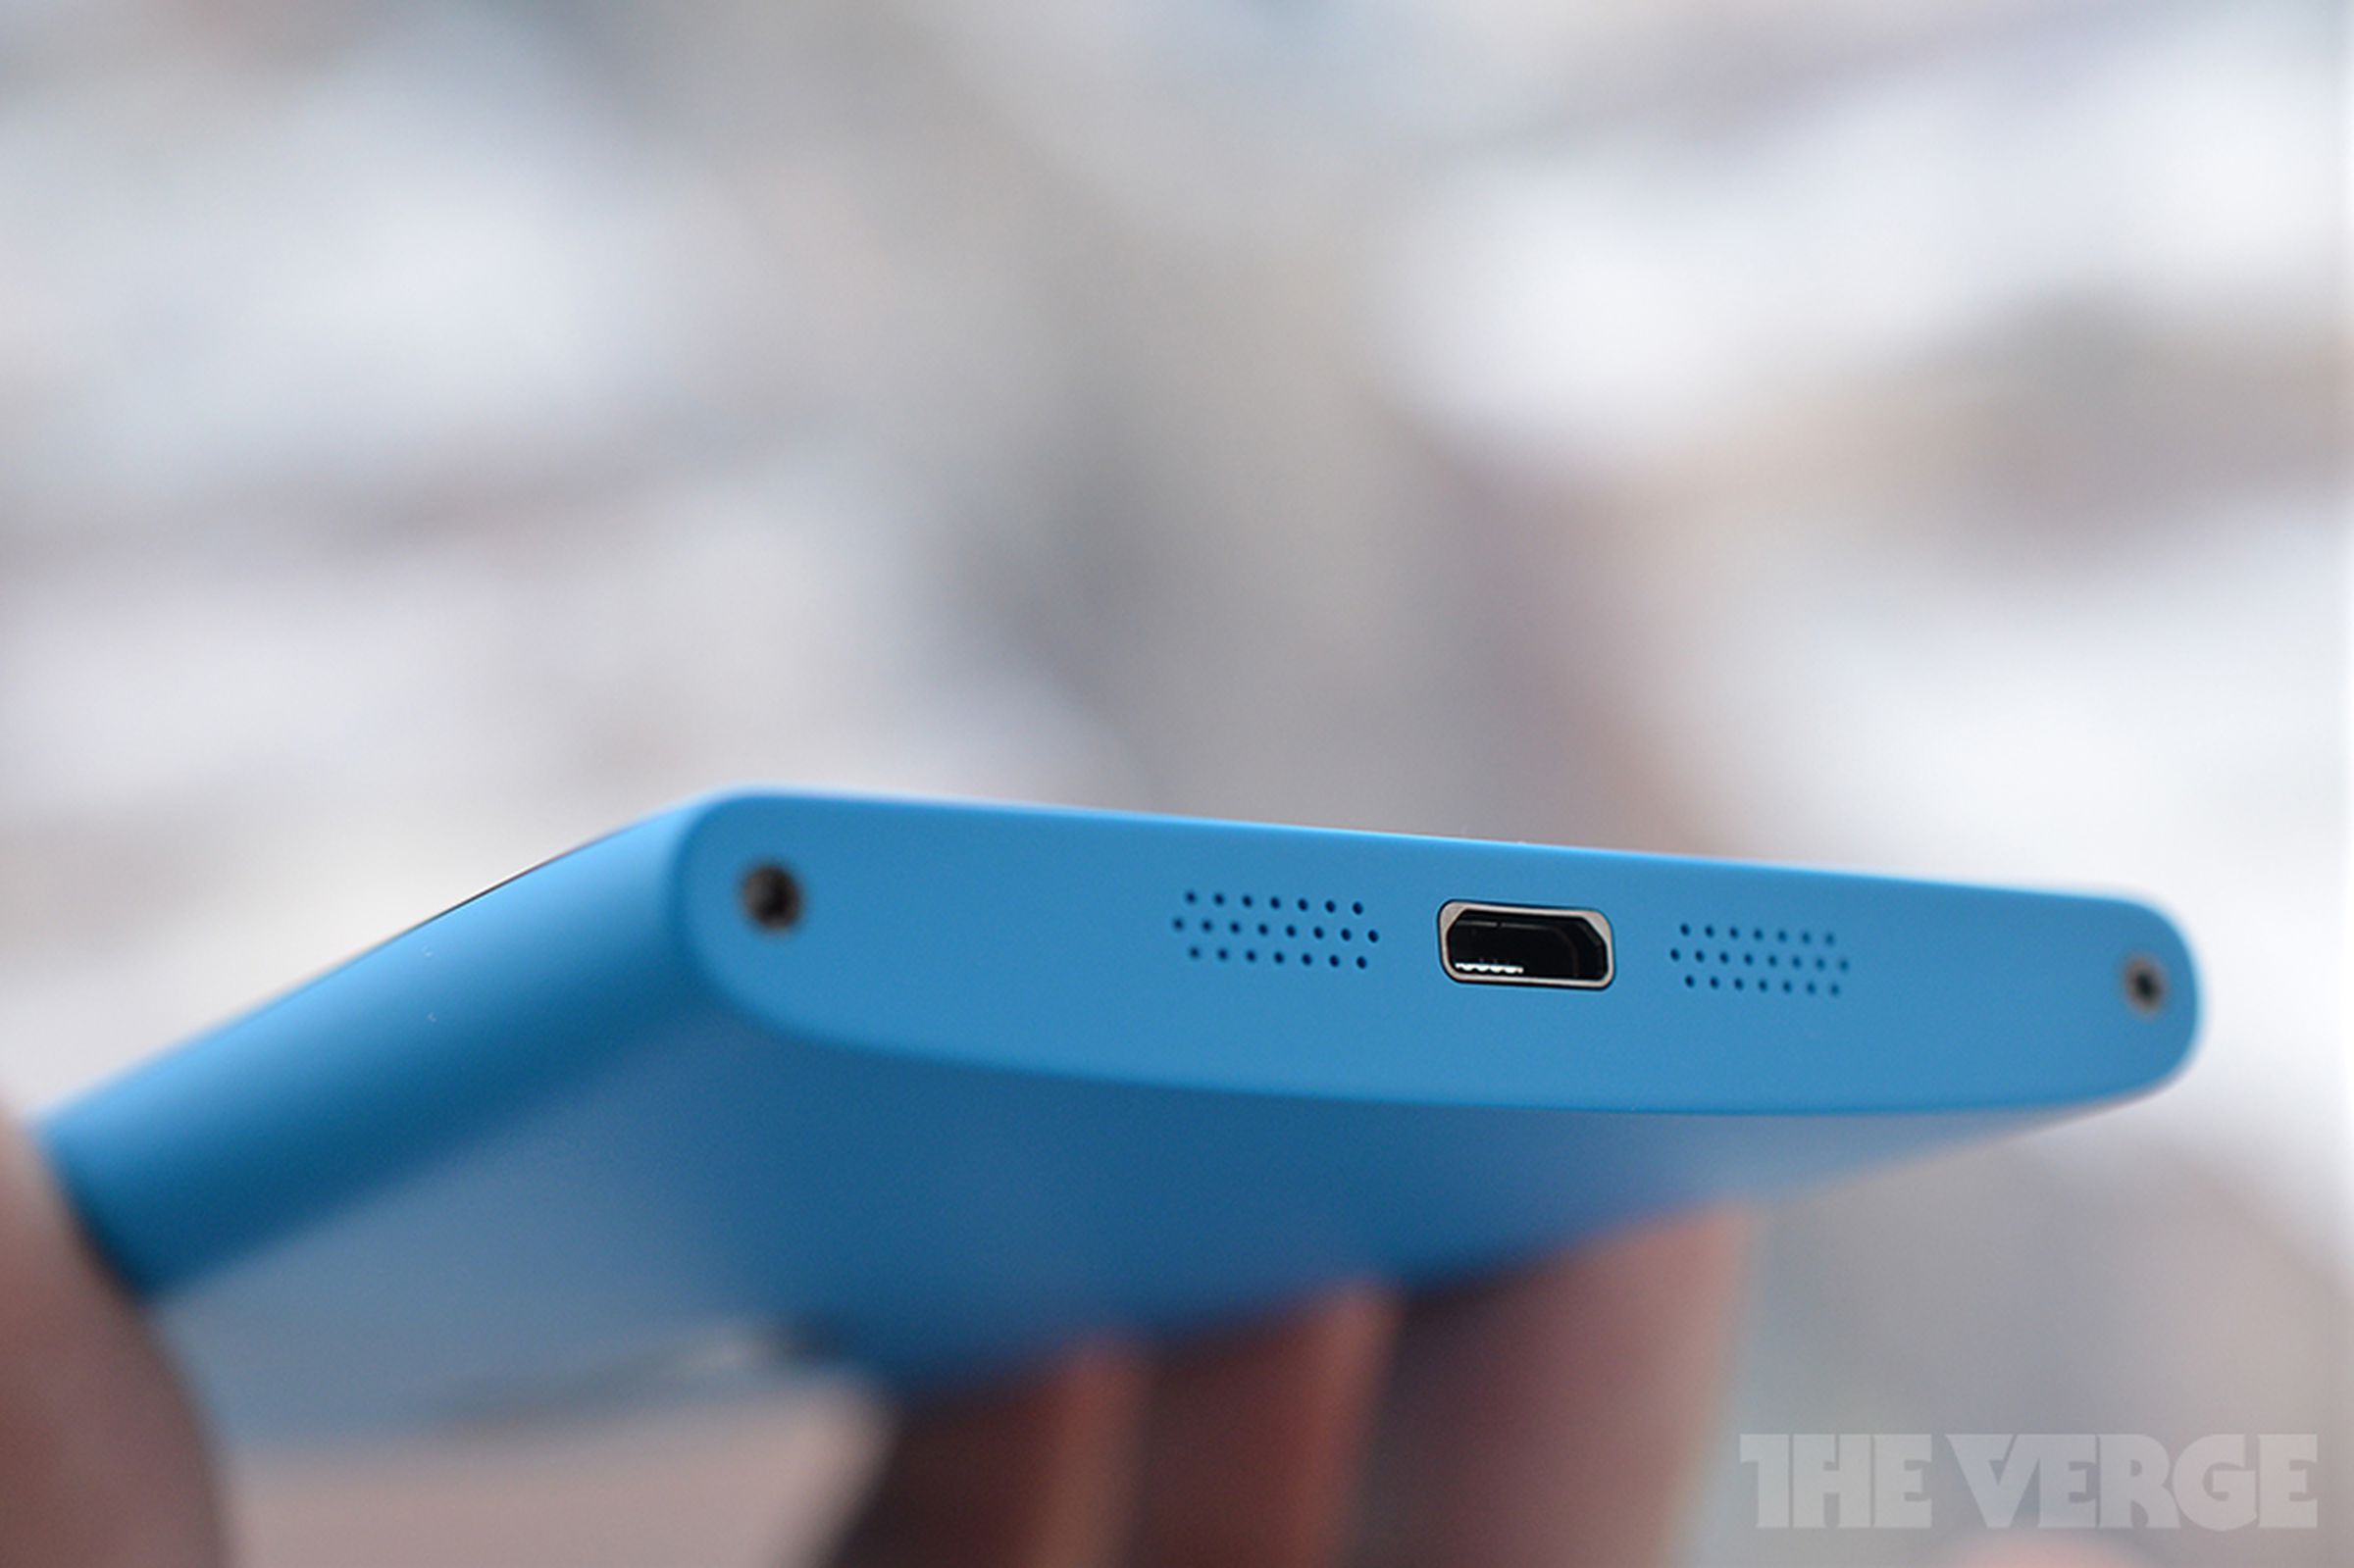 Lumia 920 for AT&T in cyan (hands-on pictures)